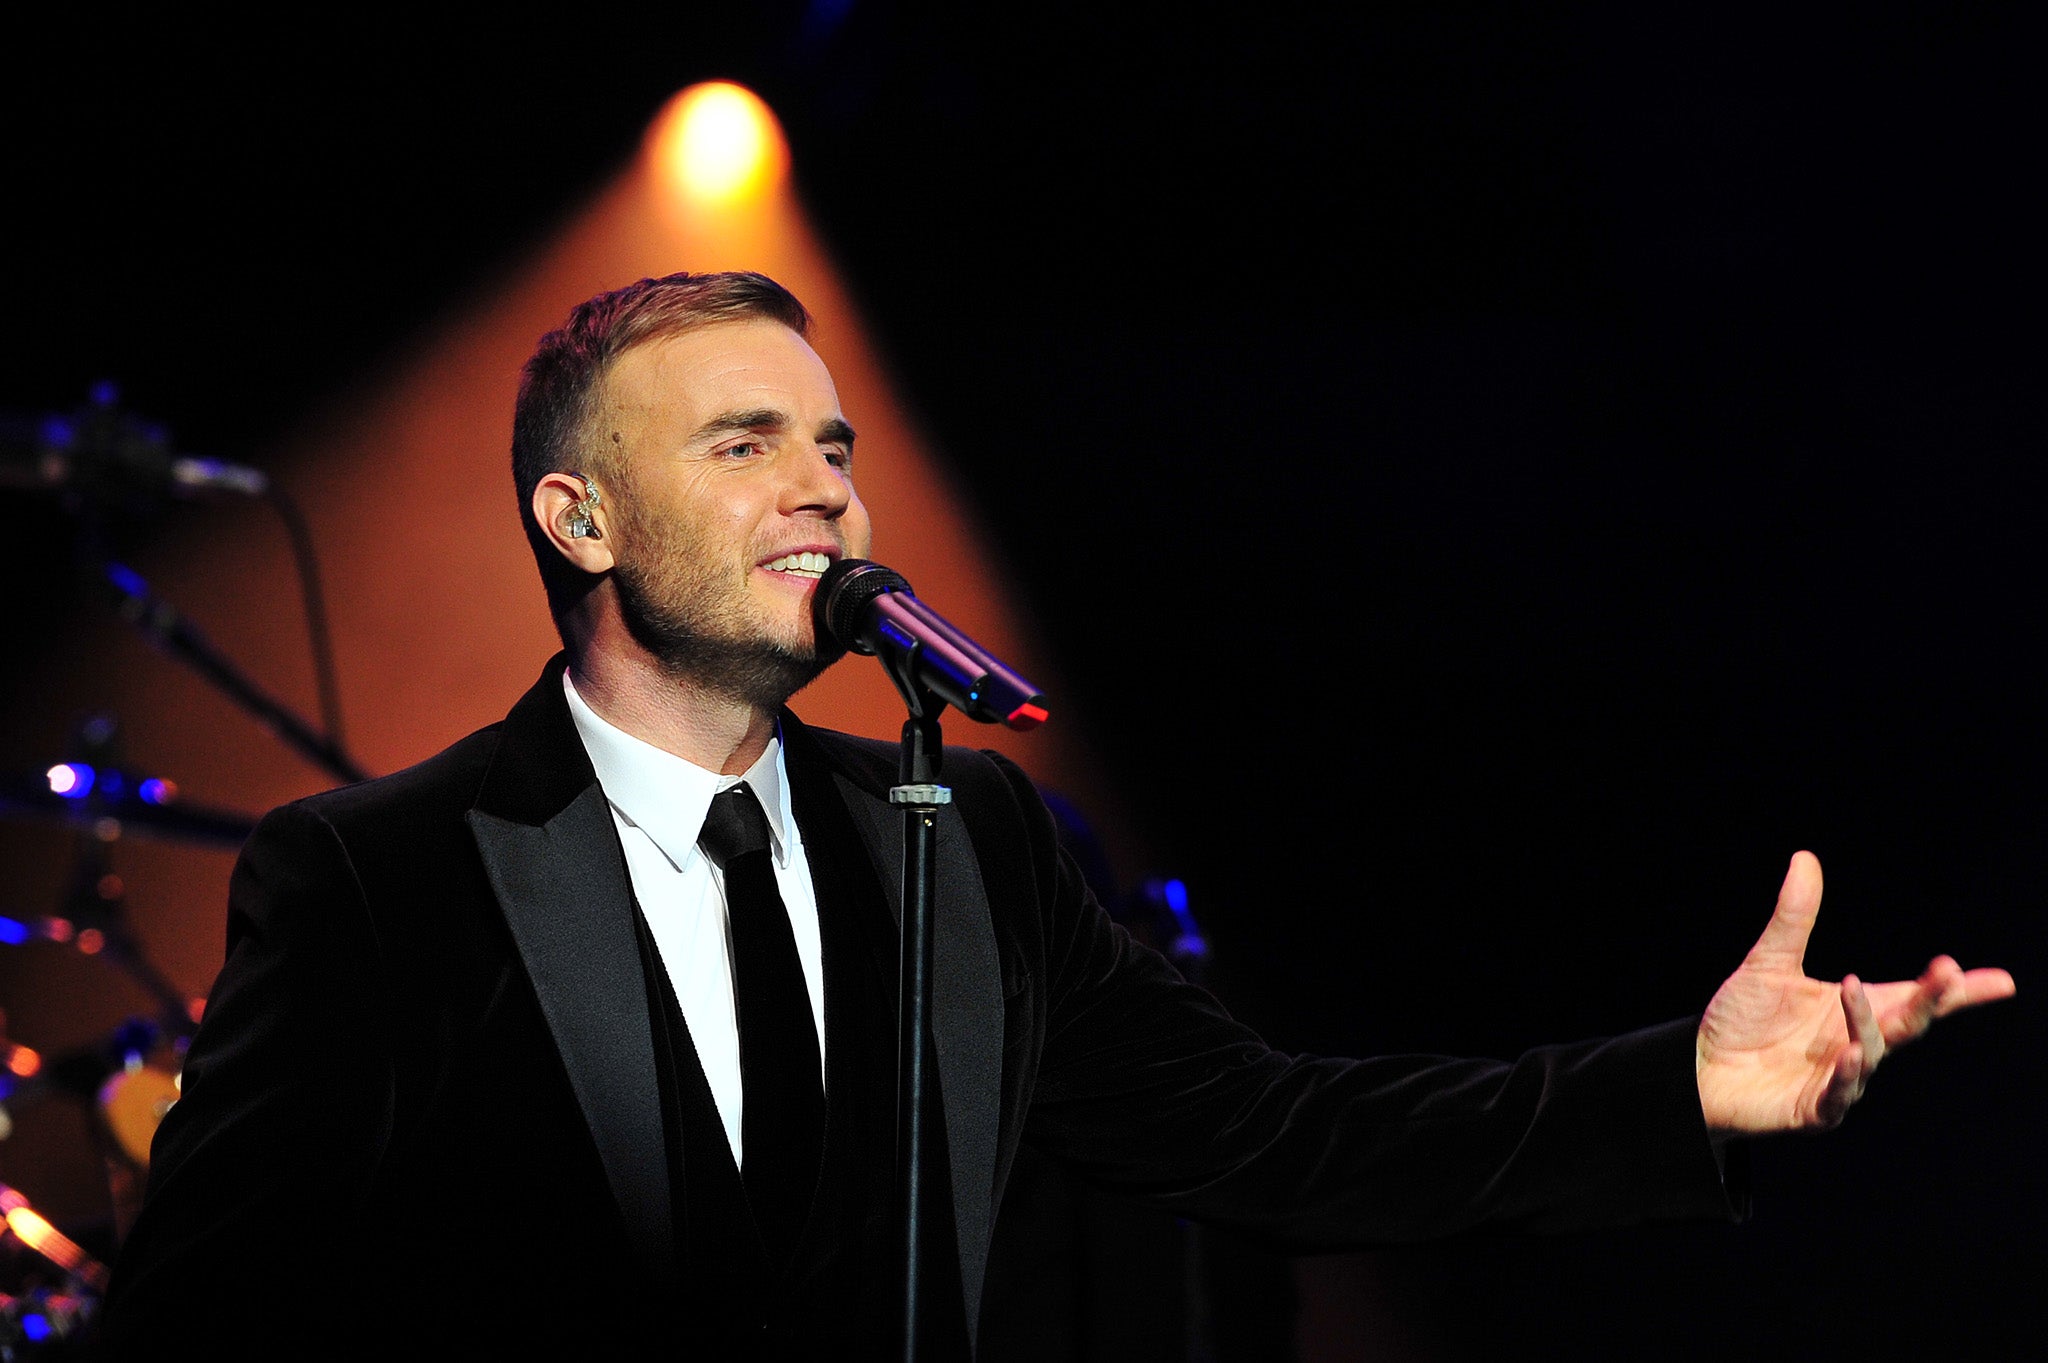 Gary Barlow performs at a concert in support of The Prince's Trust, 2011